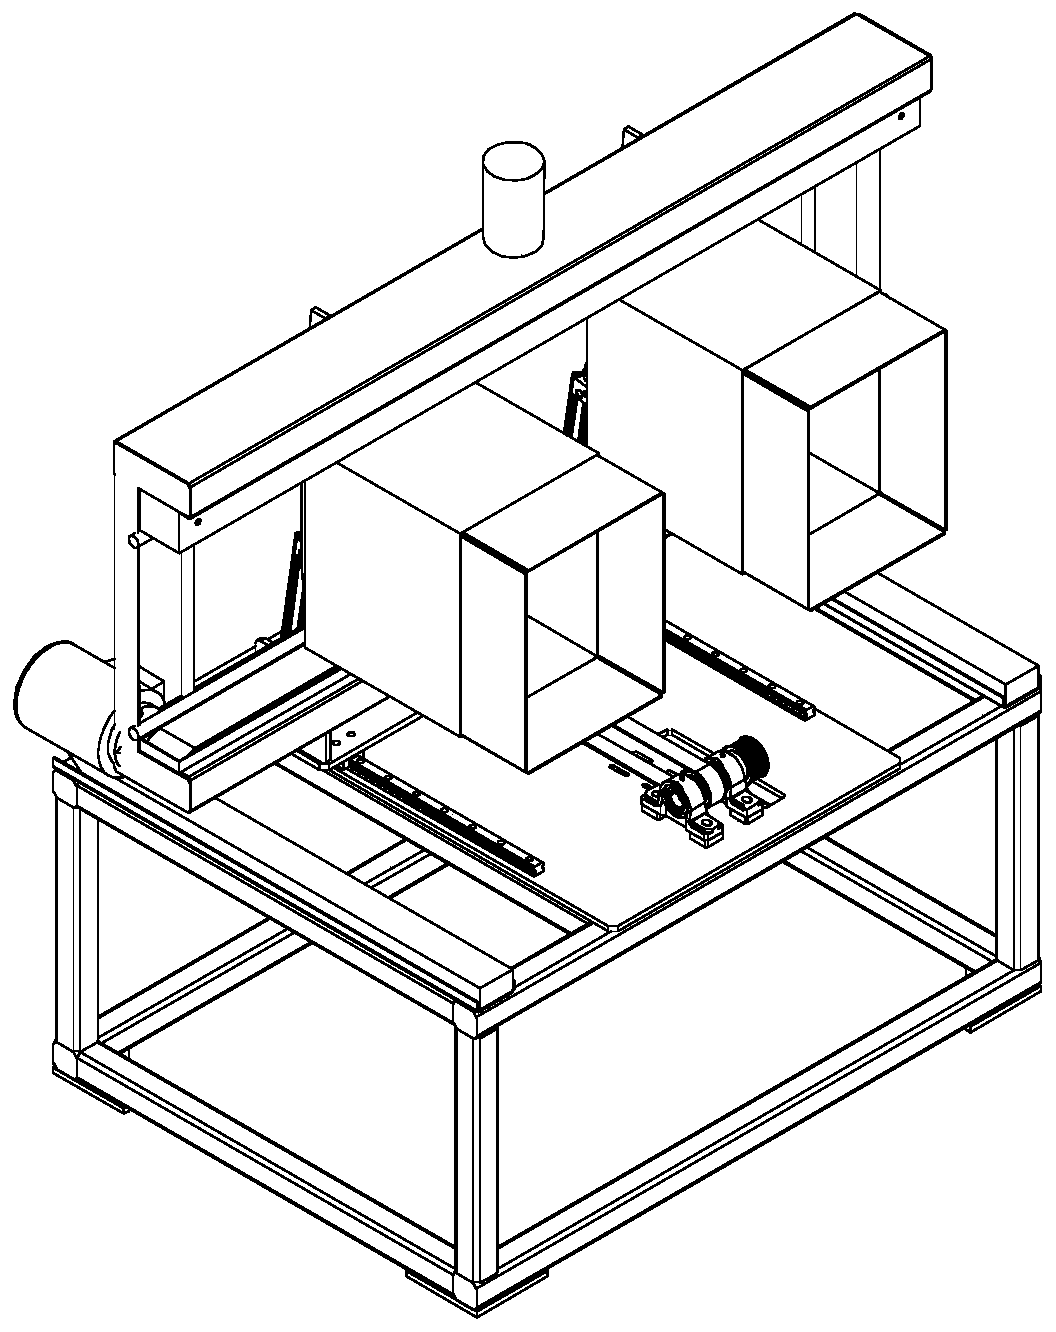 A packing method for rectangular objects